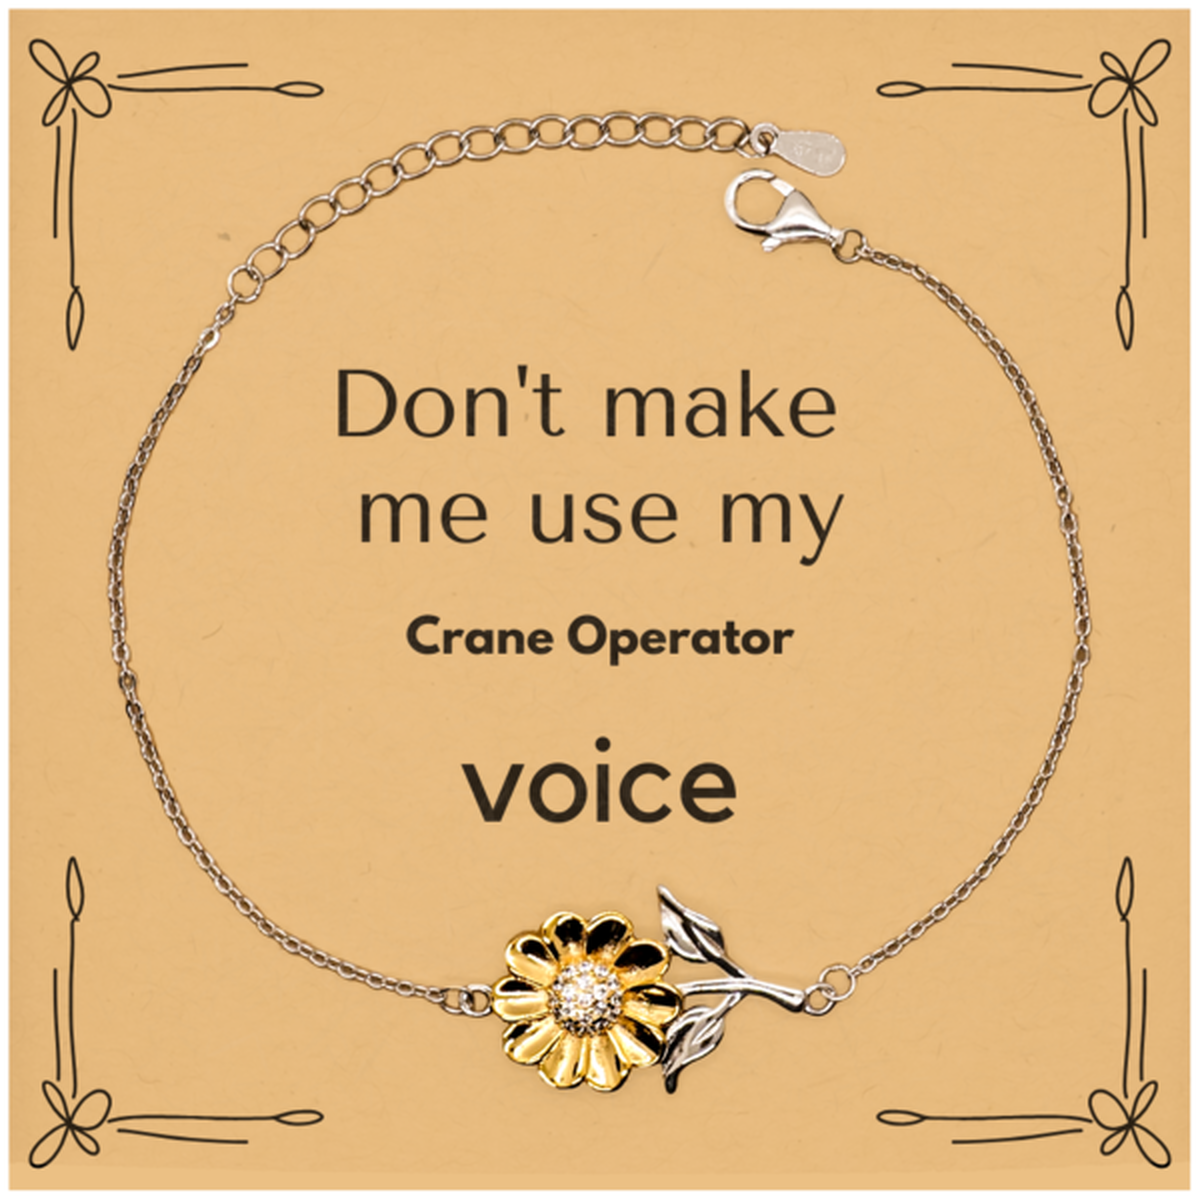 Don't make me use my Crane Operator voice, Sarcasm Crane Operator Card Gifts, Christmas Crane Operator Sunflower Bracelet Birthday Unique Gifts For Crane Operator Coworkers, Men, Women, Colleague, Friends